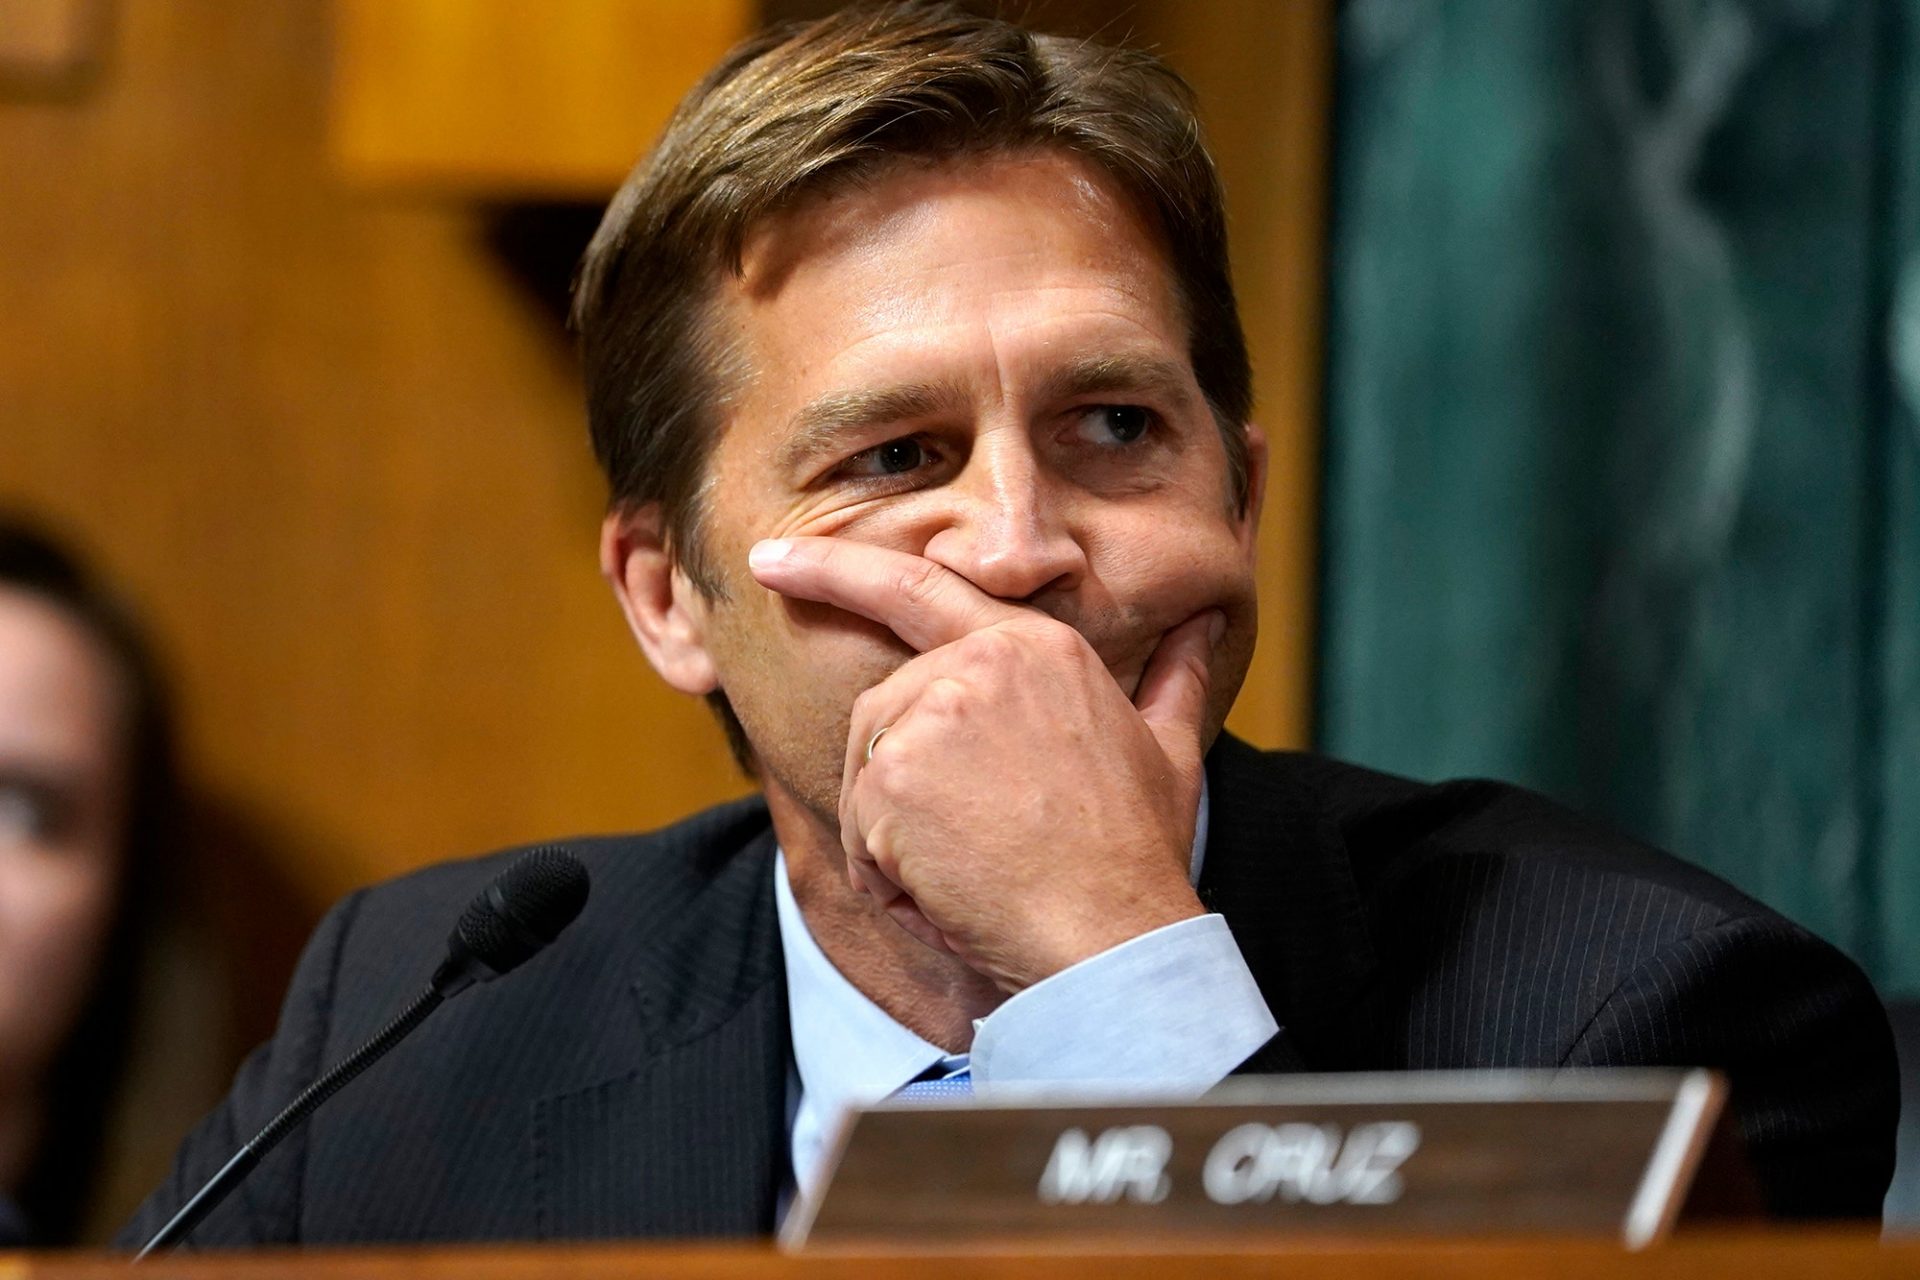 Ben Sasse, Who’s Served as Trump’s Footstool for Four Years, Now Has Defective Things to Verbalize About Him